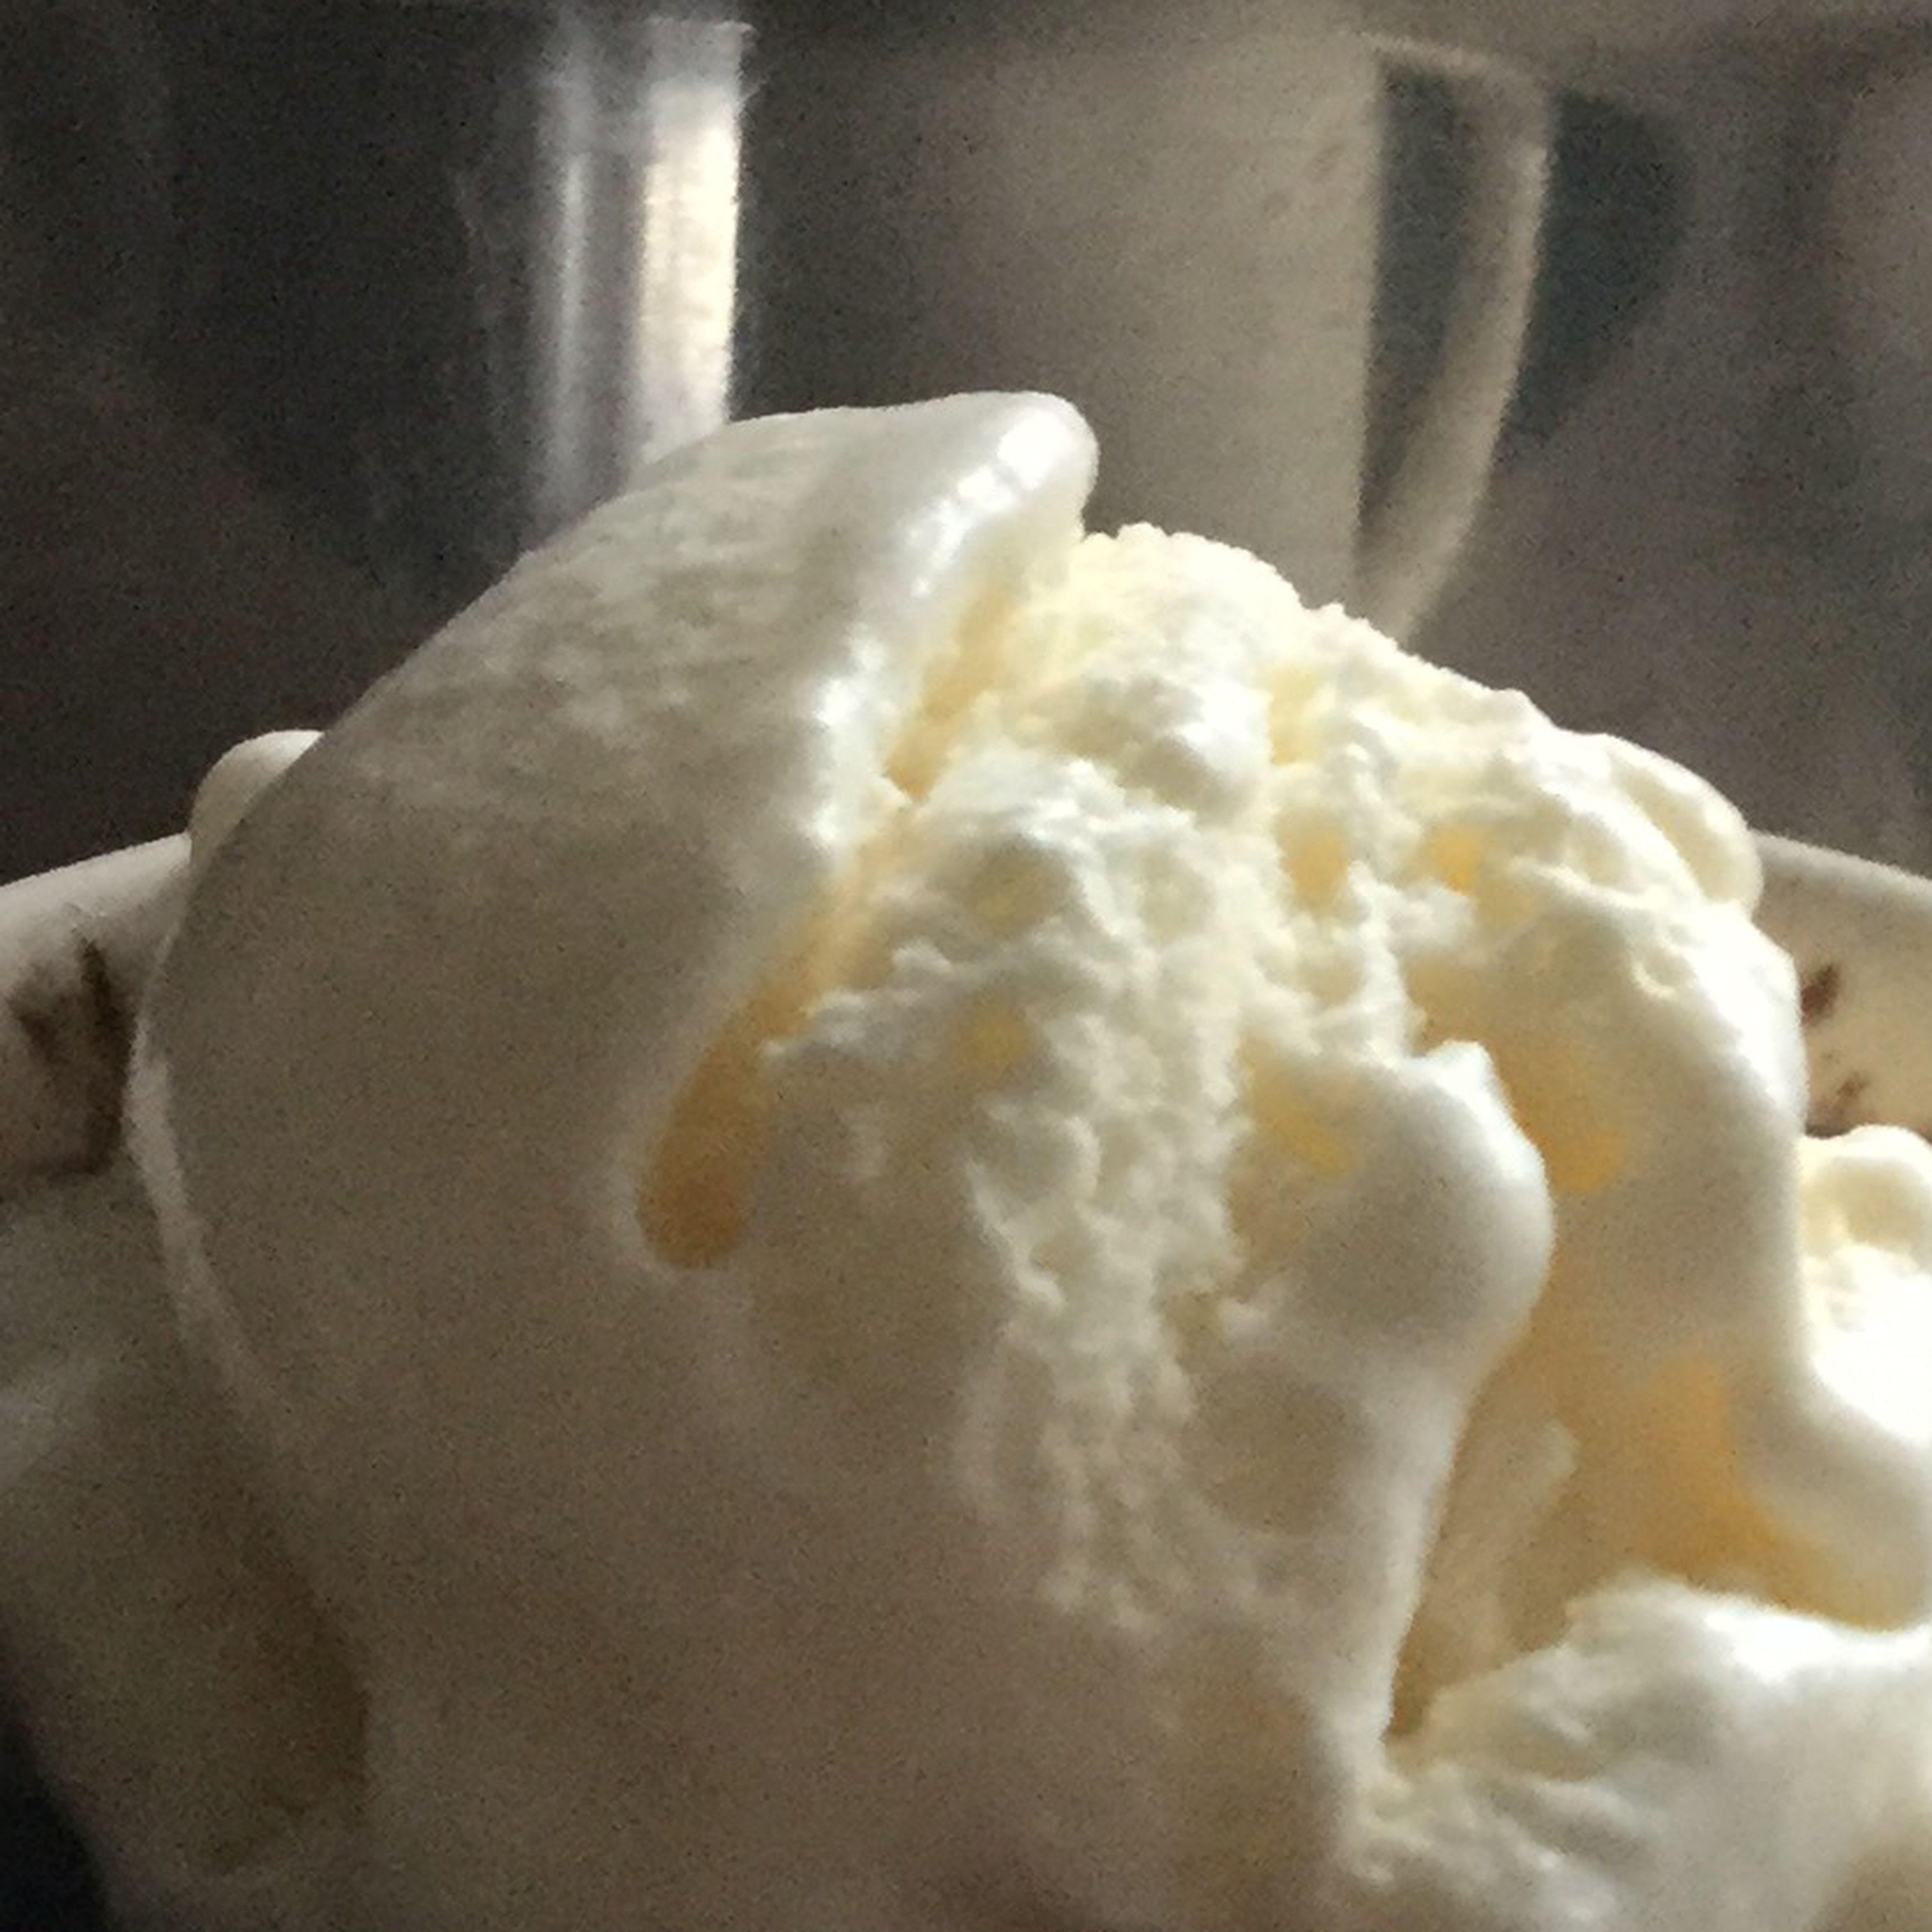 Take vanilla ice cream that has been frozen for 4-5 hours and cut into bite sized squares or preferred shape